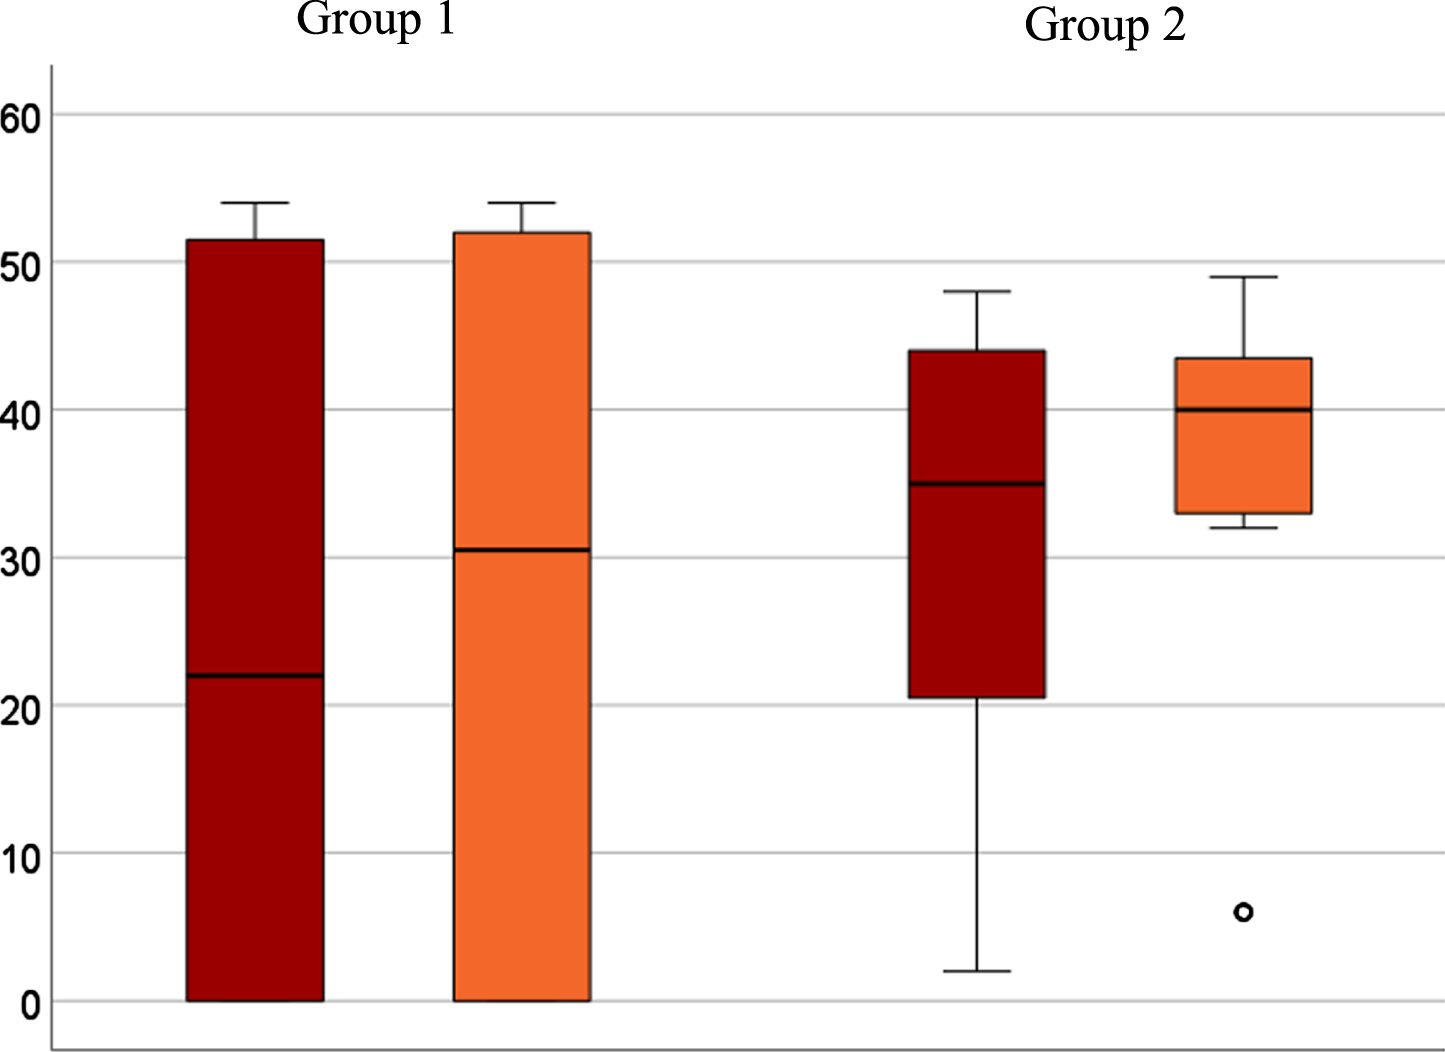 Boxplot for group comparison in a telediagnostic (red) and face-to-face (orange) setting of total scores after intention-to-treat analysis (N = 15). A6 seen as outlier (∘) with significant lower scores in both diagnostic settings (telediagnostic: 2; face-to-face: 6).